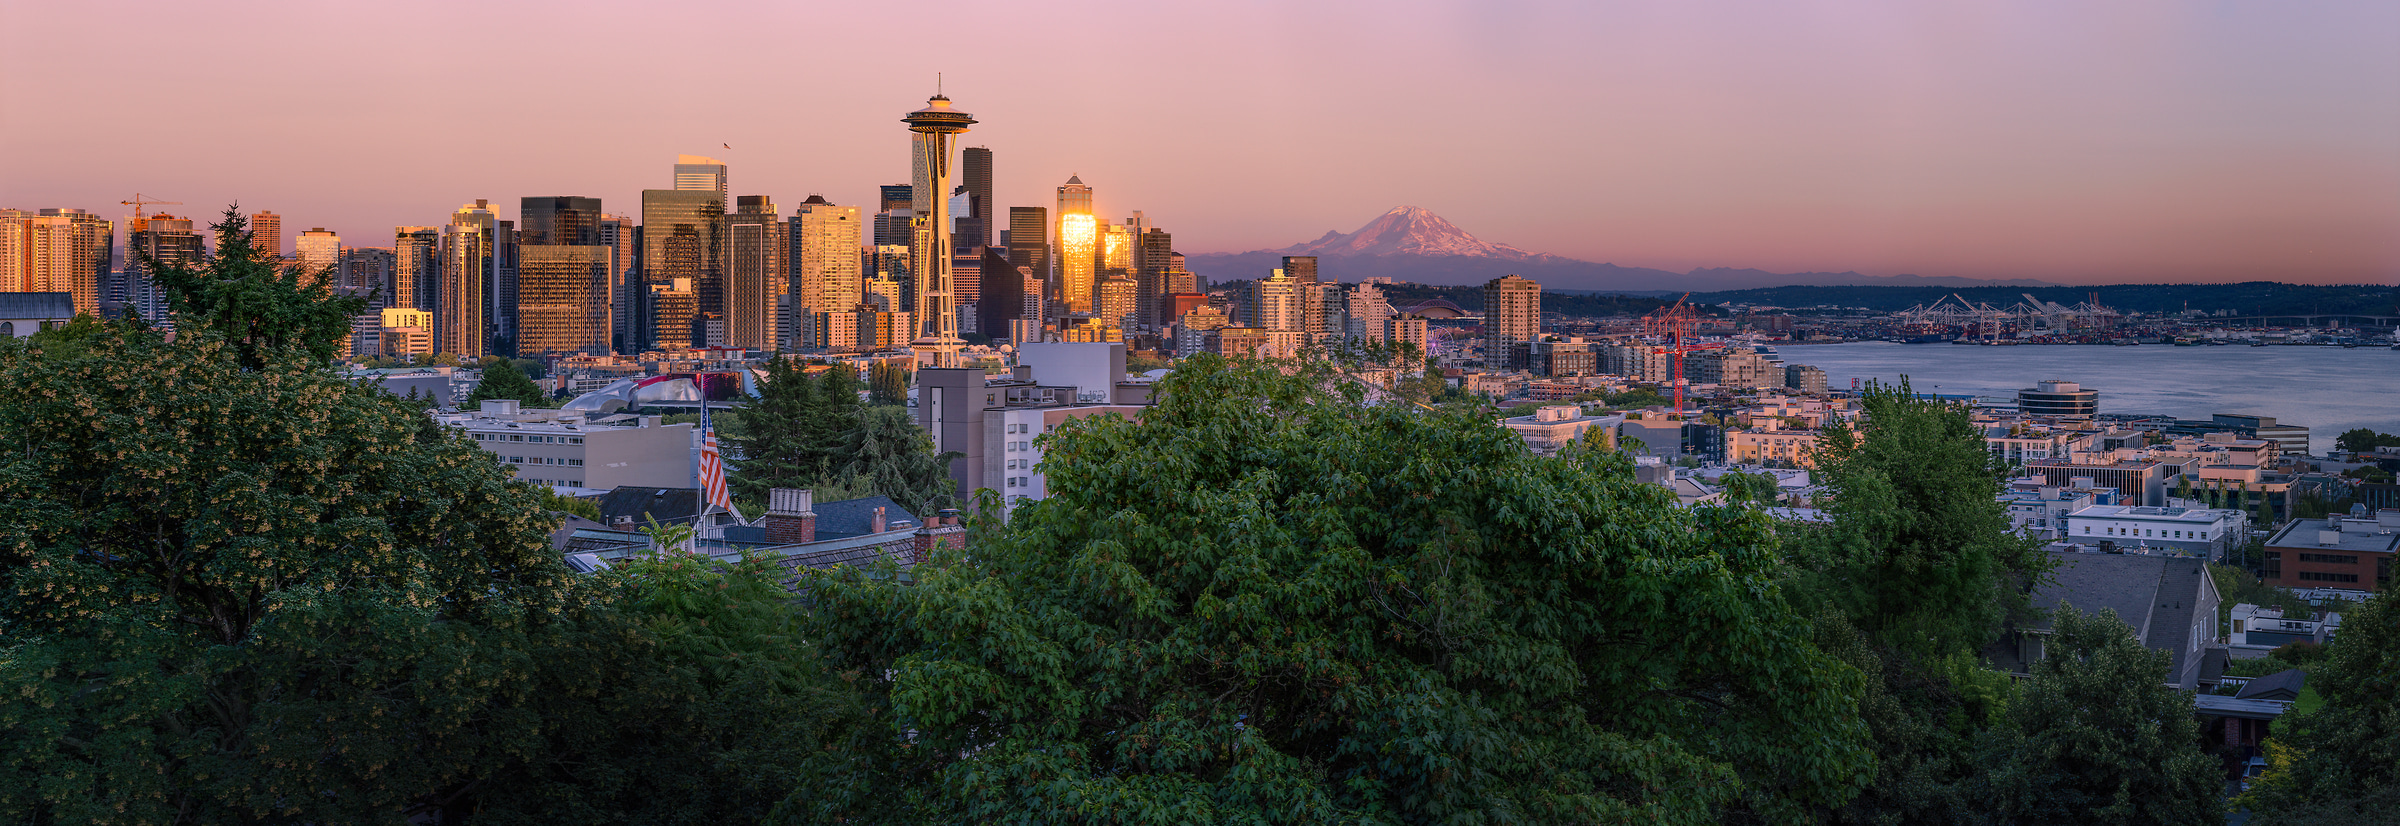 501 megapixels! A very high resolution, large-format VAST photo print of the Seattle skyline at sunset; cityscape photograph created by Chris Blake in Kerry Park, Seattle WA.